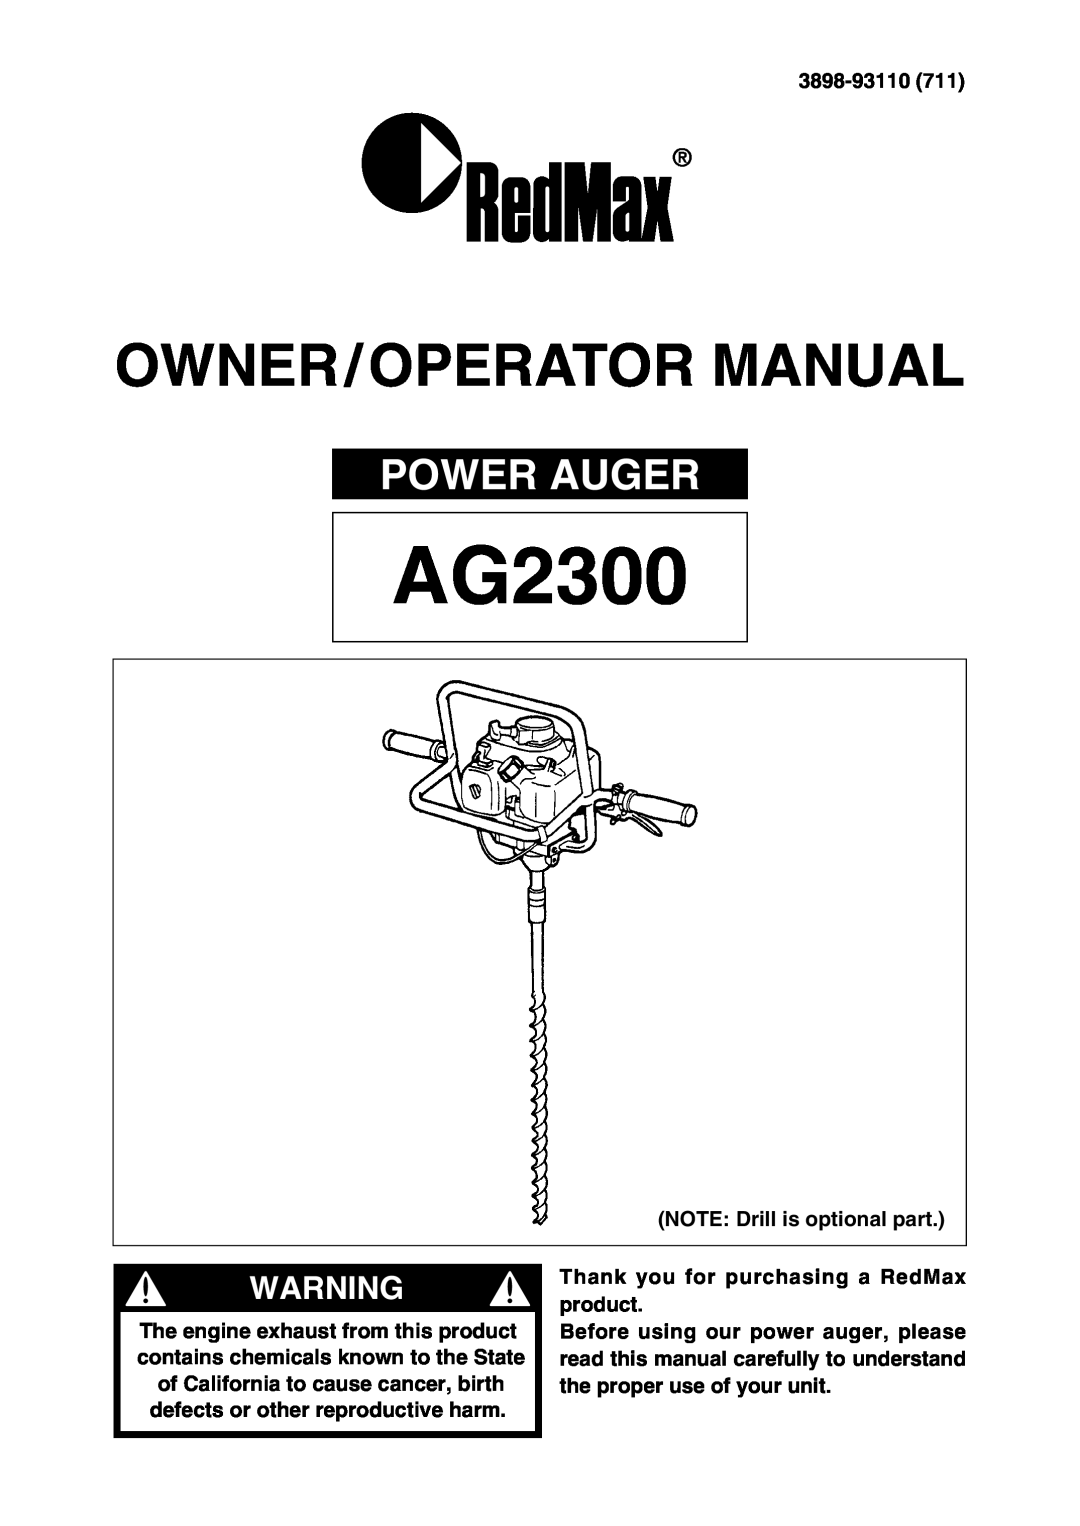 RedMax AG2300 manual Power Auger, Owner/Operator Manual, 3898-93110, NOTE Drill is optional part 